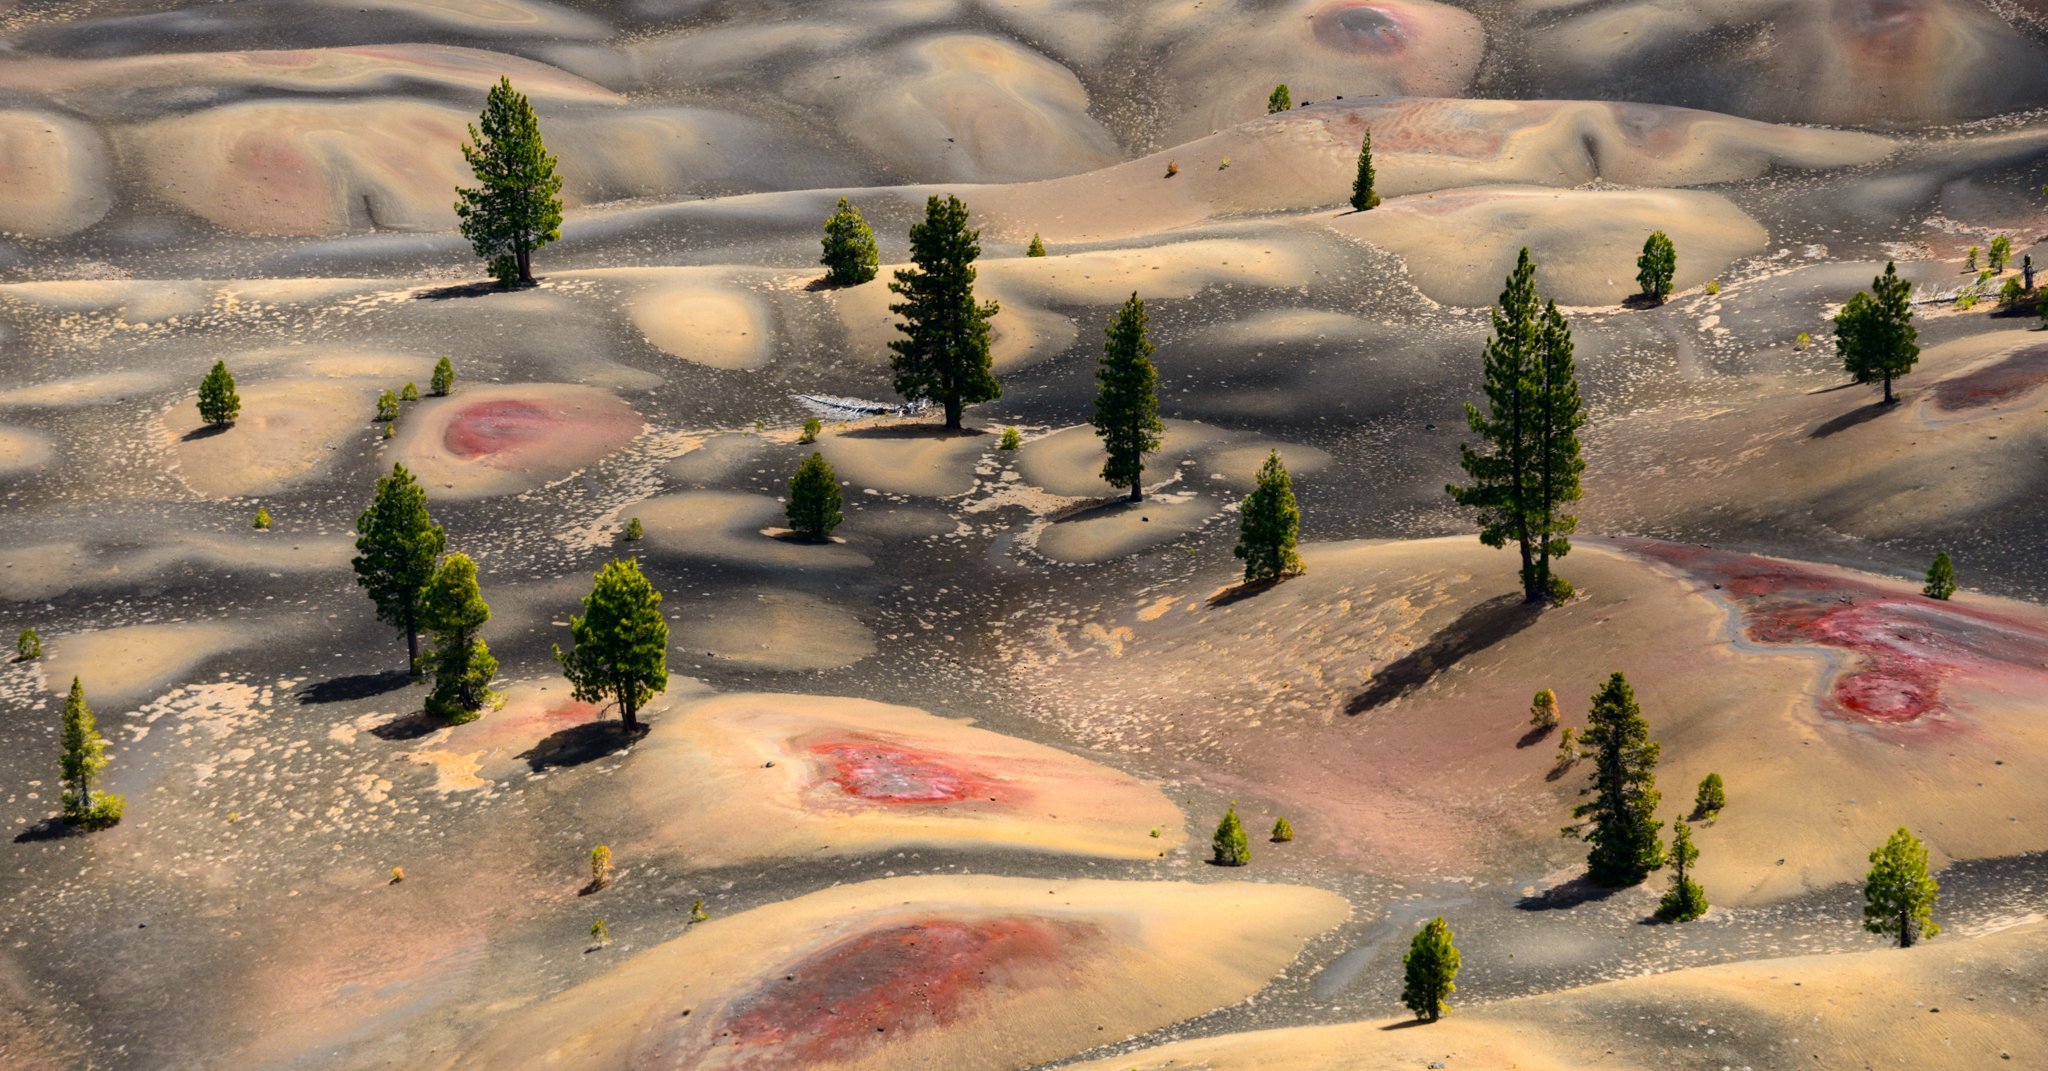 These Colorful Volcanic Sand Dunes Make Taking A Bad Photo Impossible